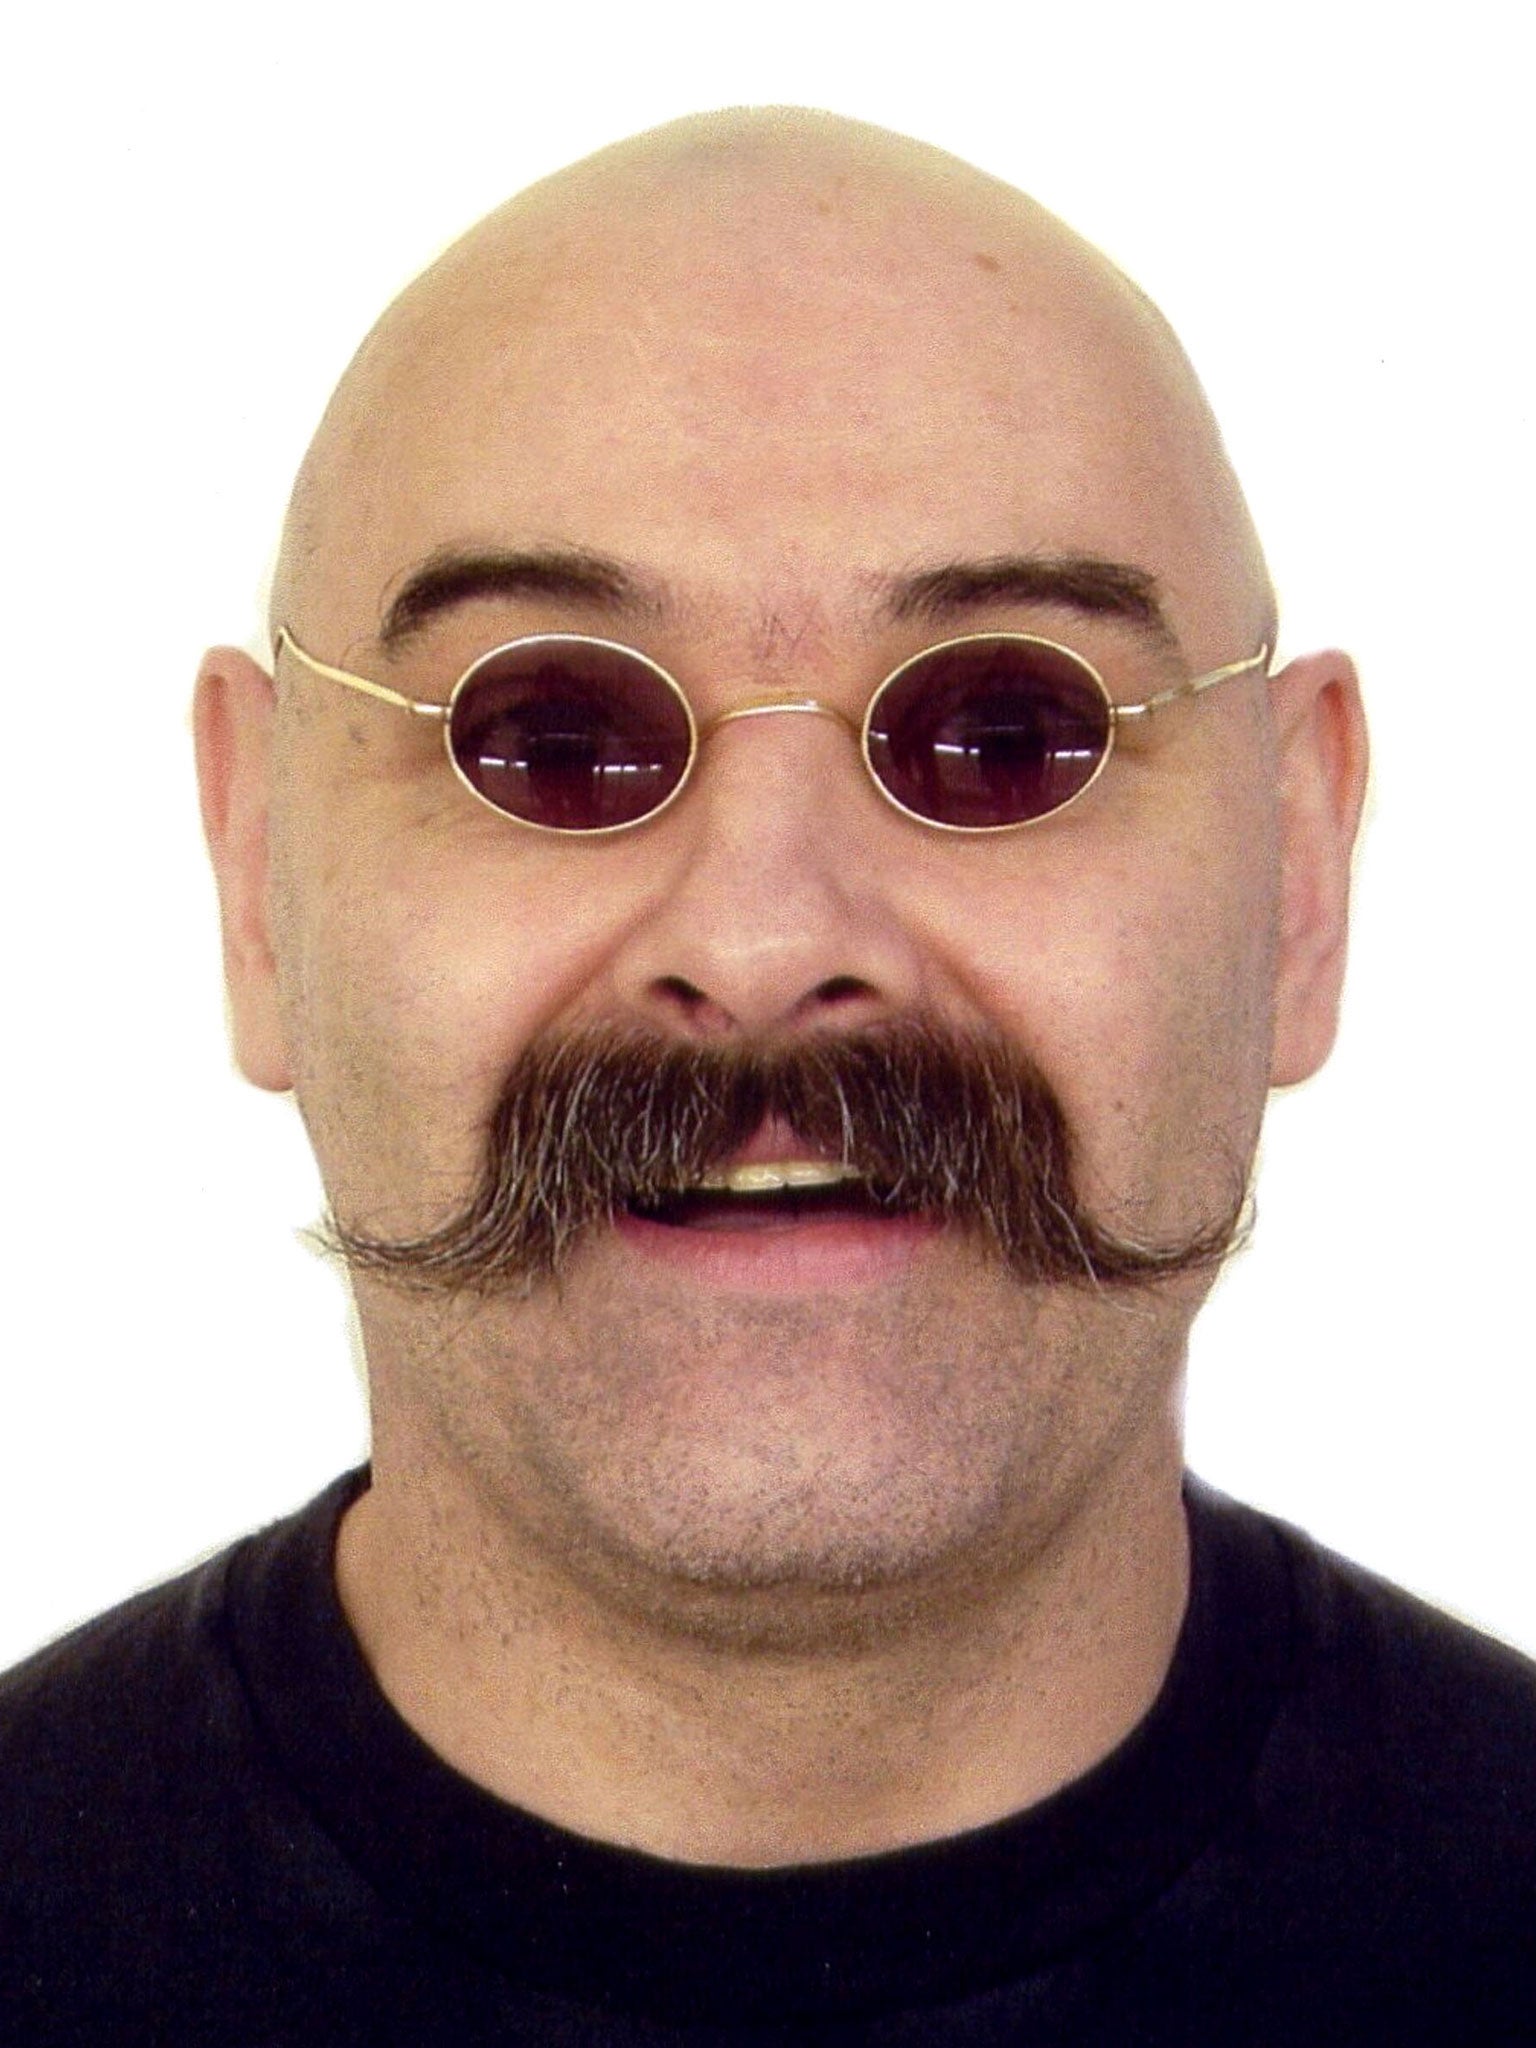 Charles Bronson became the first prisoner to request a public parole board hearing